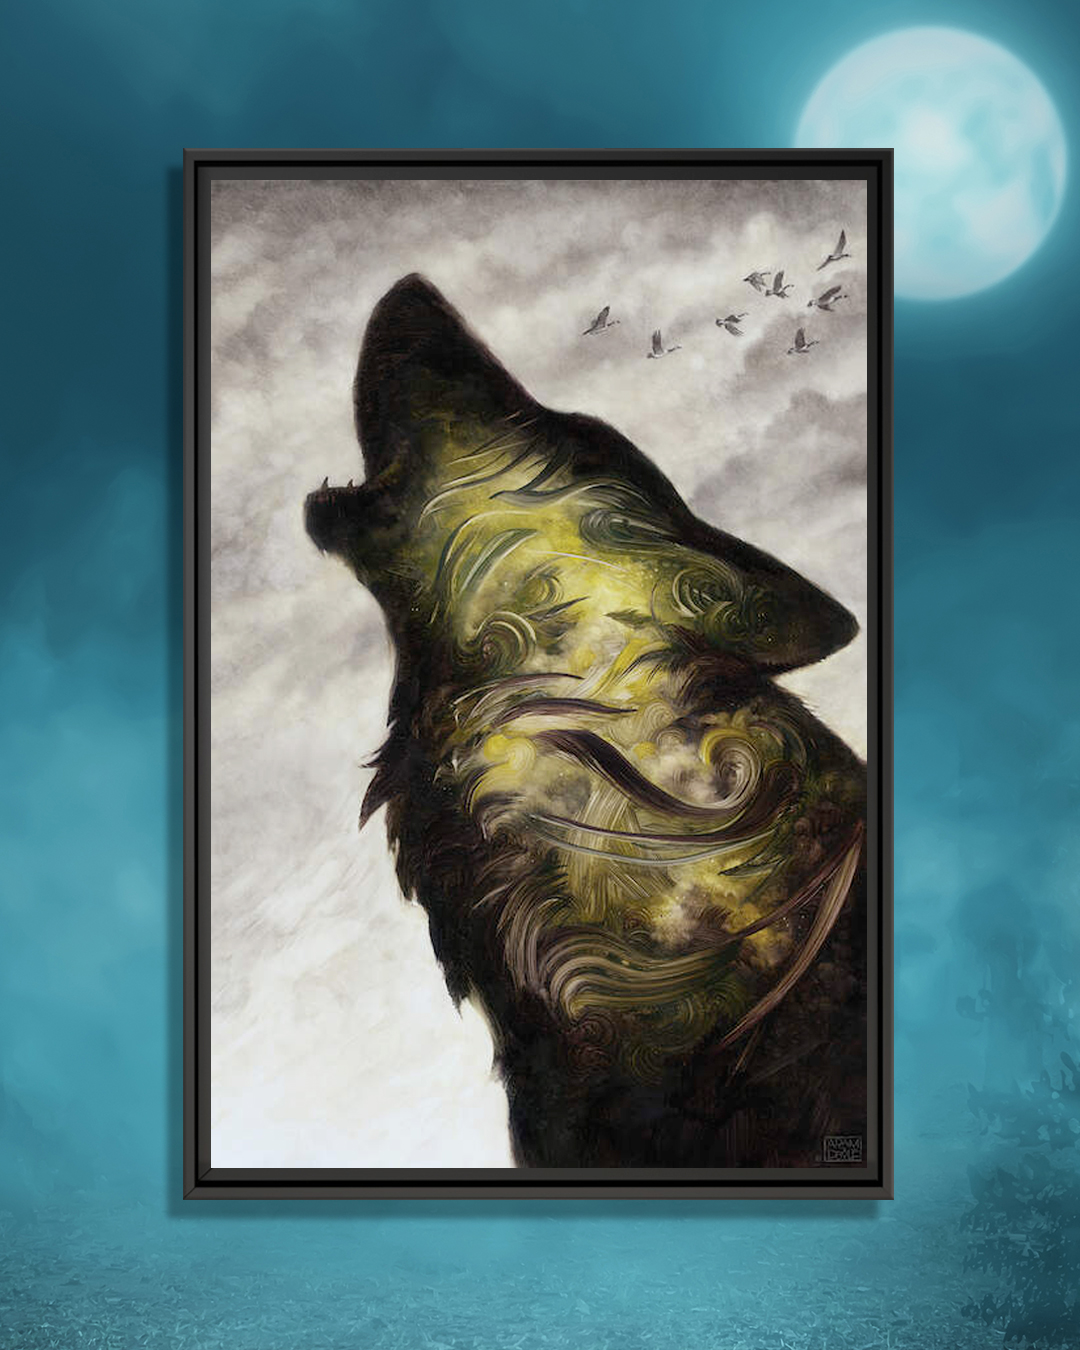 a howling wolf with green and gray swirls on fur and birds flying in distance